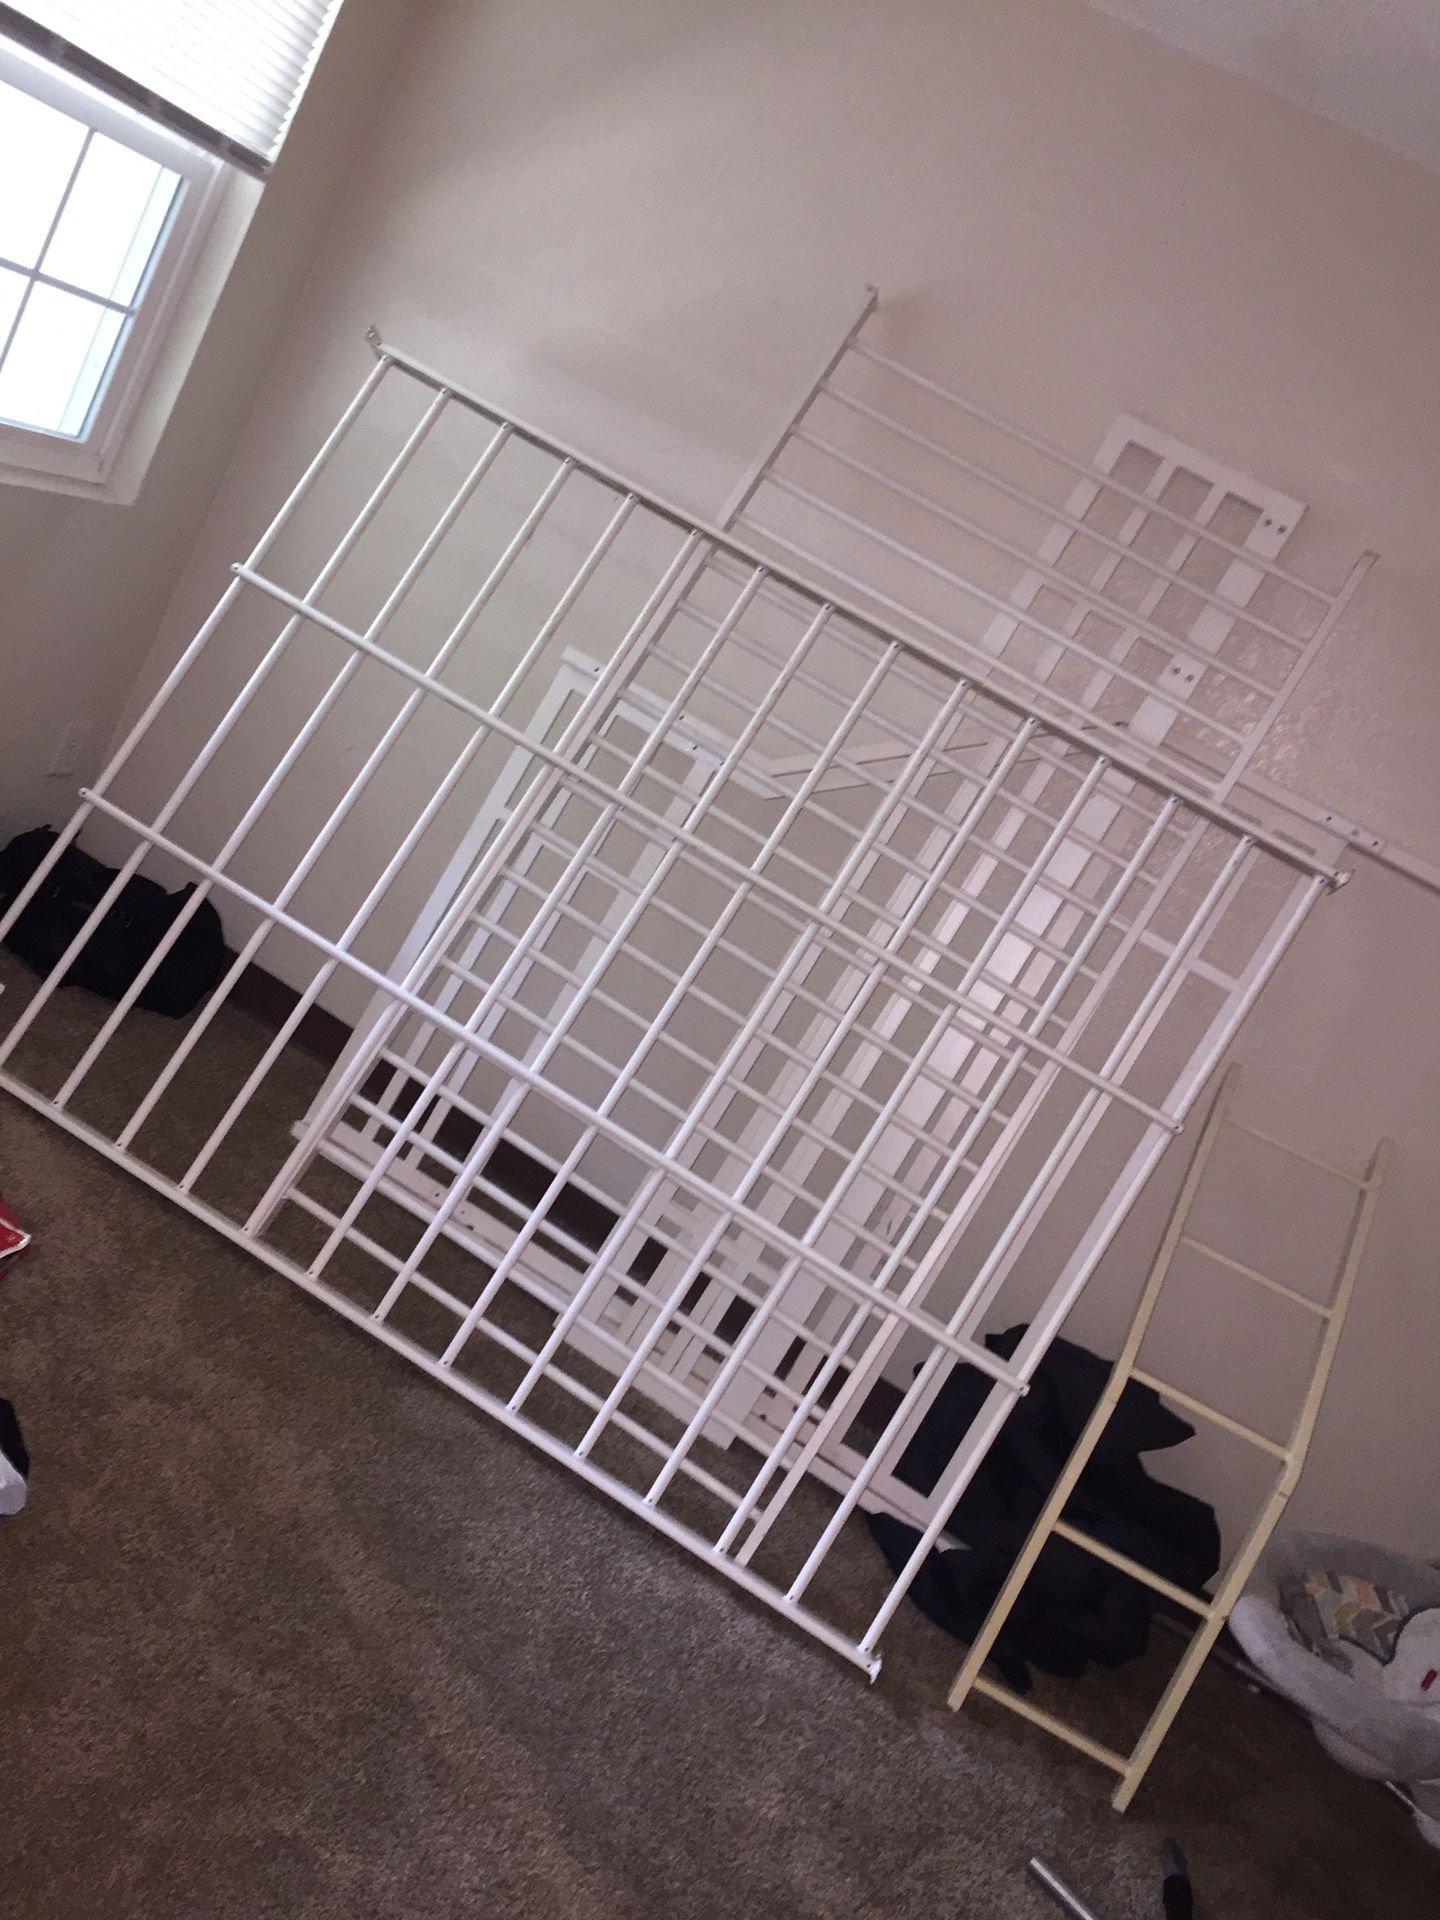 White bunk bed for sale, already took apart. Includes all bolts and screws . Full over twin size